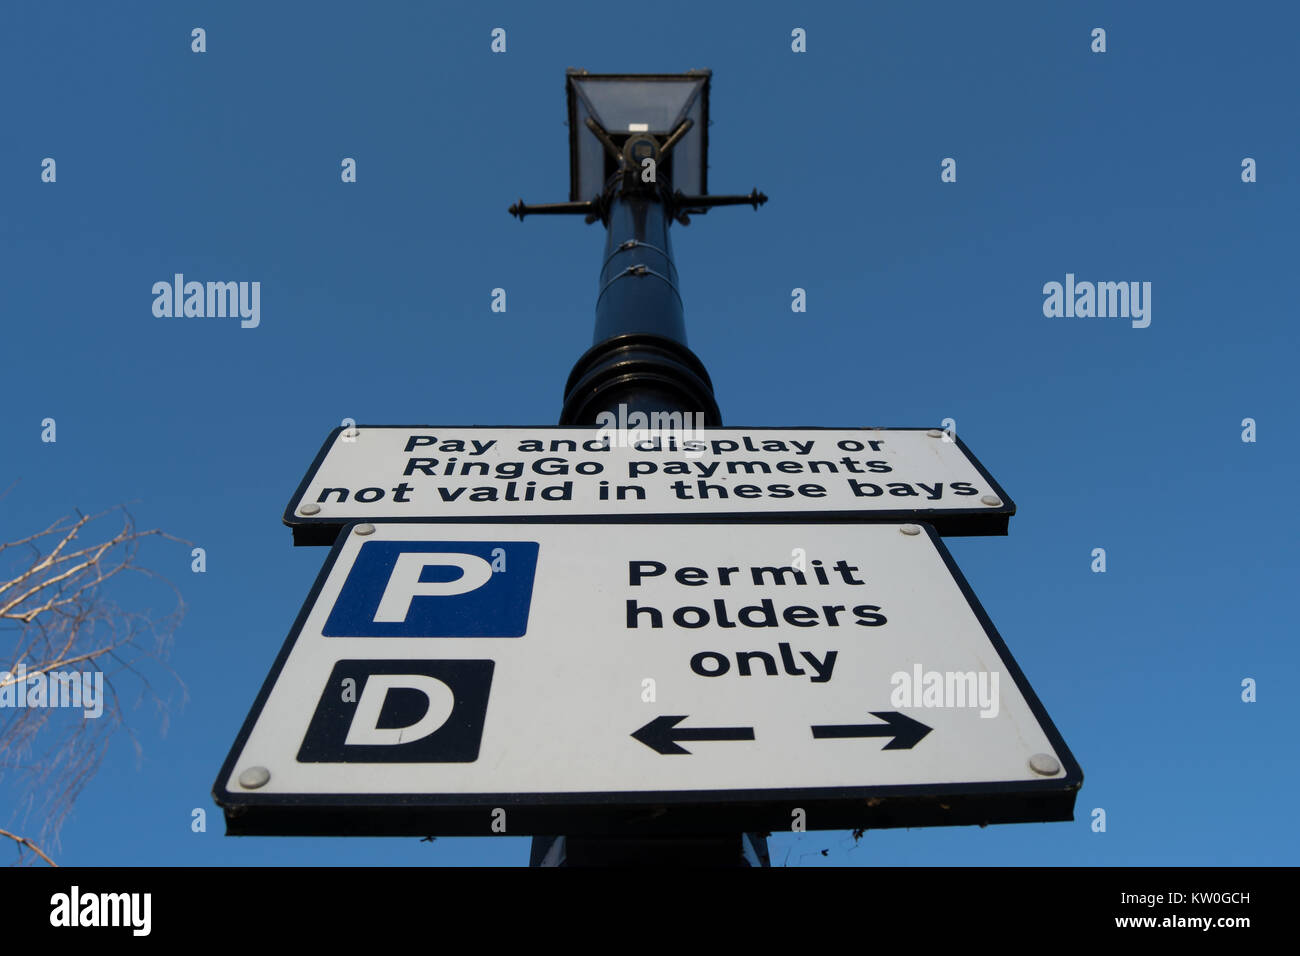 road sign indicating parking for permit holders only and stating pay and display and ringgo payments are not valid, in twickenham, middlesex, england Stock Photo